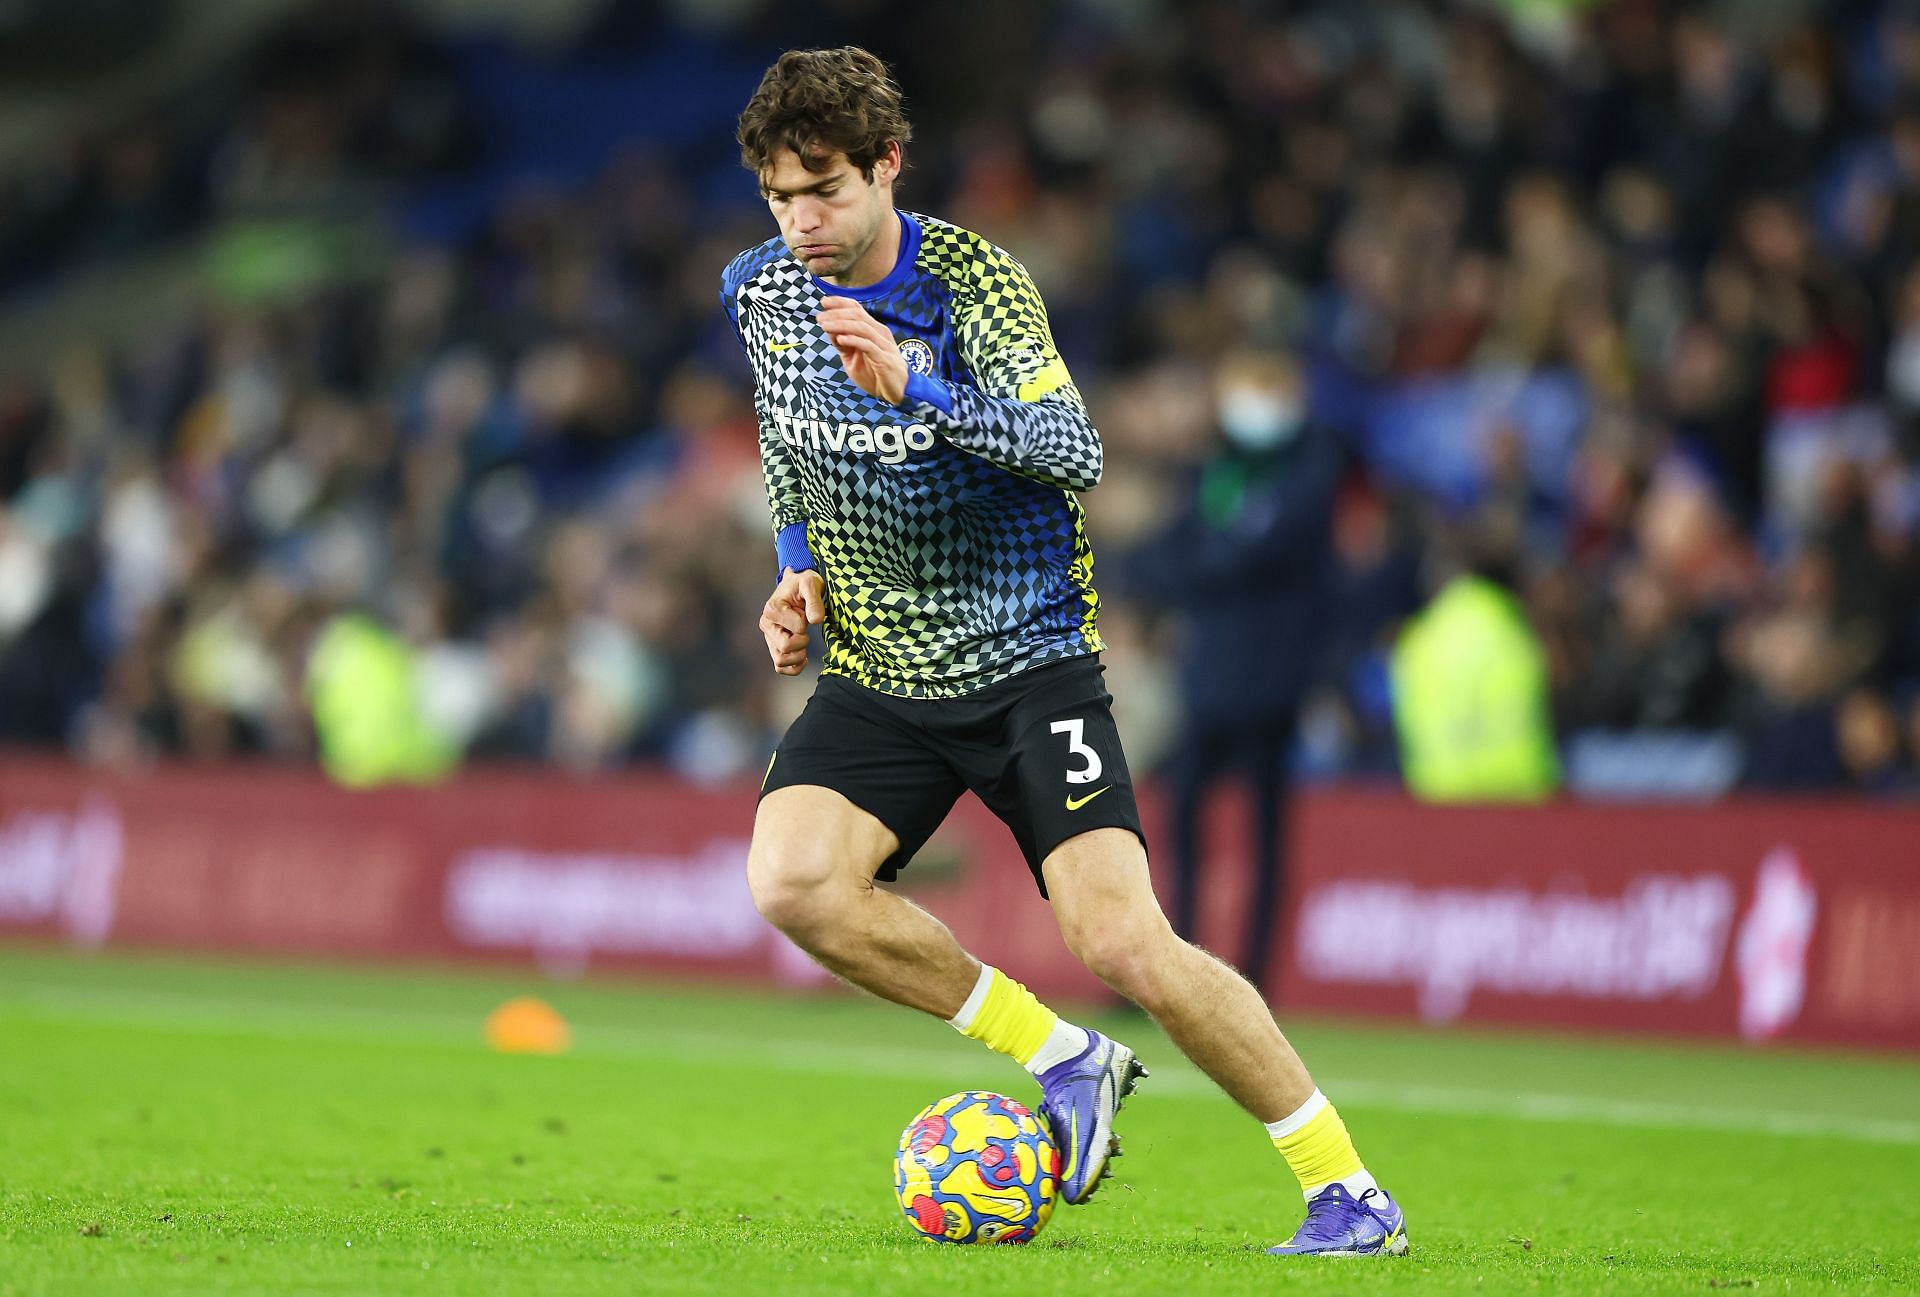 Barcelona have identified Marcos Alonso as the ideal alternative to Jose Gaya.